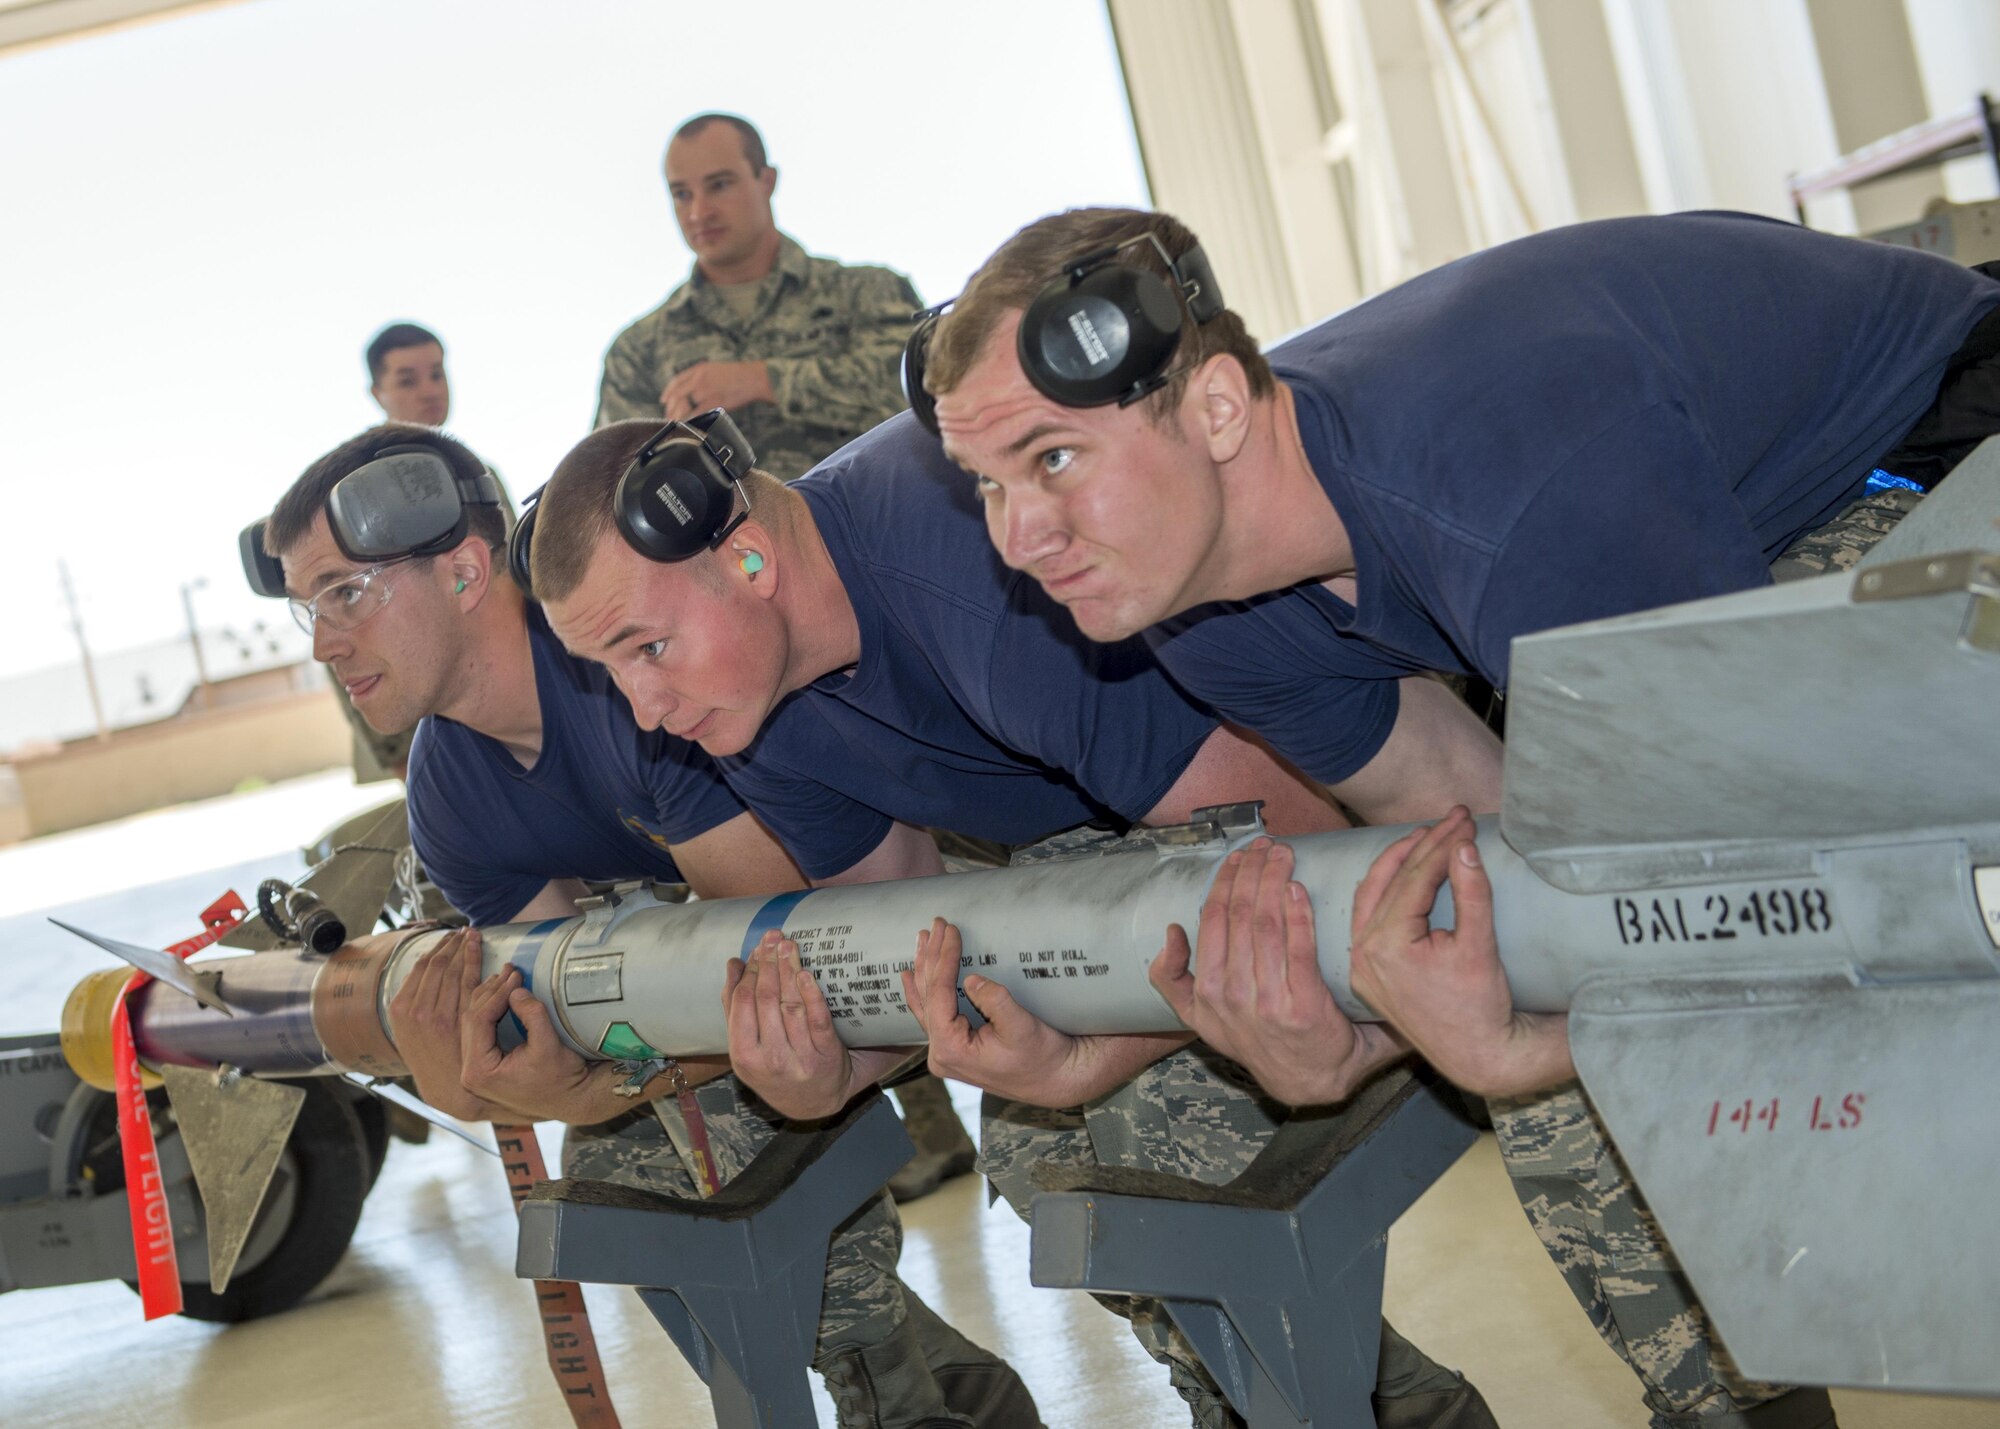 From left to right: Senior Airman Caleb, Staff Sgt. Josh and Senior Airman Matthew, 54th Fighter Group weapons load crew members from Holloman Air Force Base, N.M., lift a training missile during the annual load competition here May 4. Teams from the 54th Fighter Group and the 49th Aircraft Maintenance Squadron here competed by testing their ability to quickly load training weapon systems onto their respective aircraft. (Last names are withheld due to operational requirements) (U.S. Air Force photo by Airman 1st Class Randahl J. Jenson)  